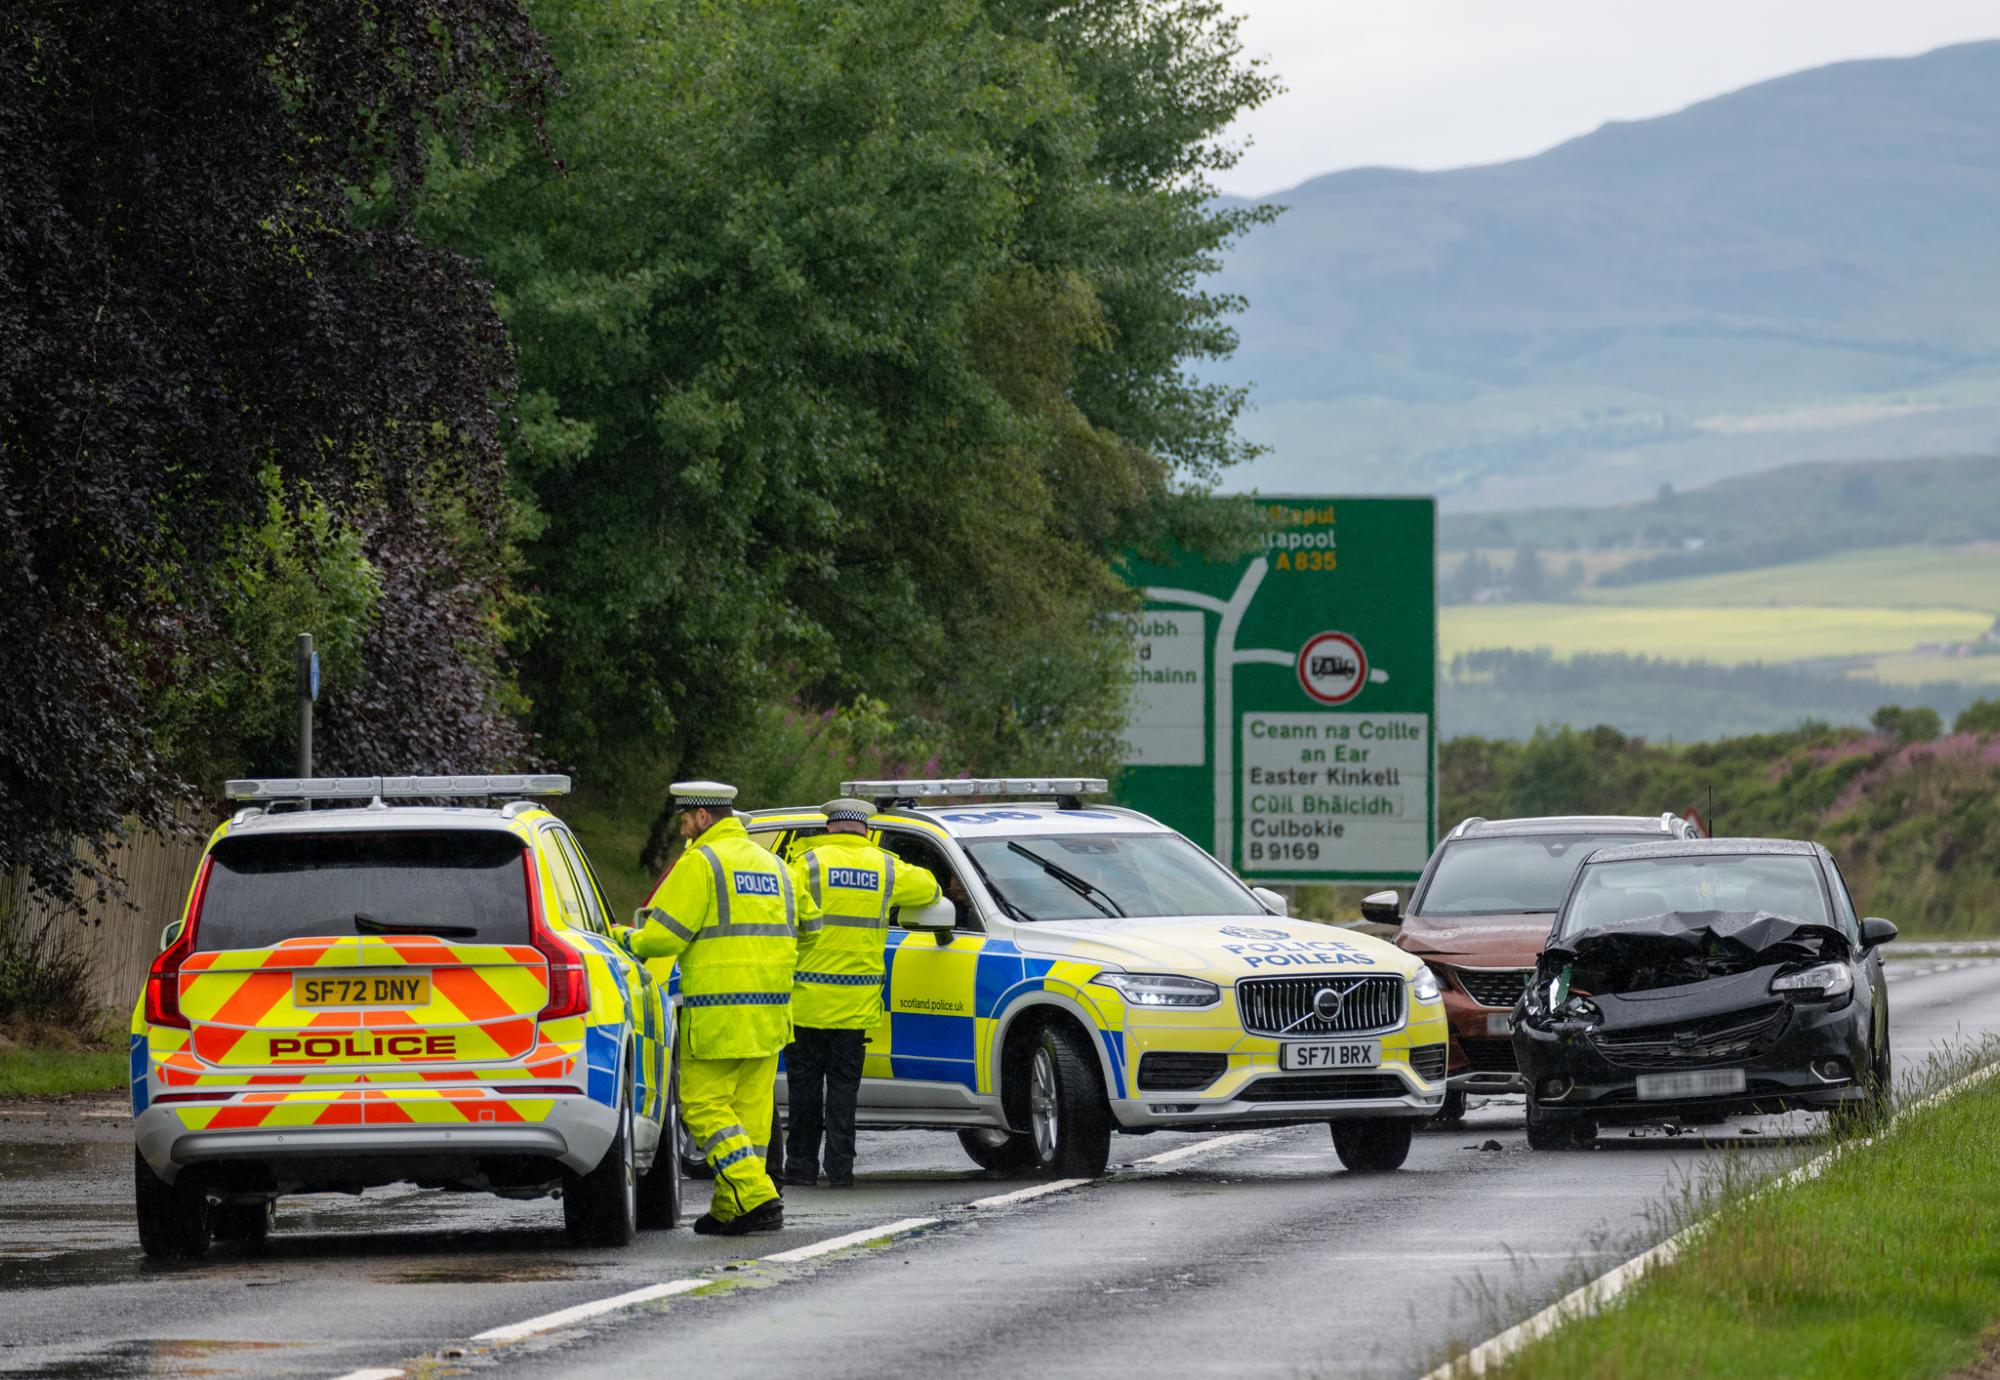 Police Scotland dealing with a serious RTC, Road Traffic Collision, on the A835 near Dingwall